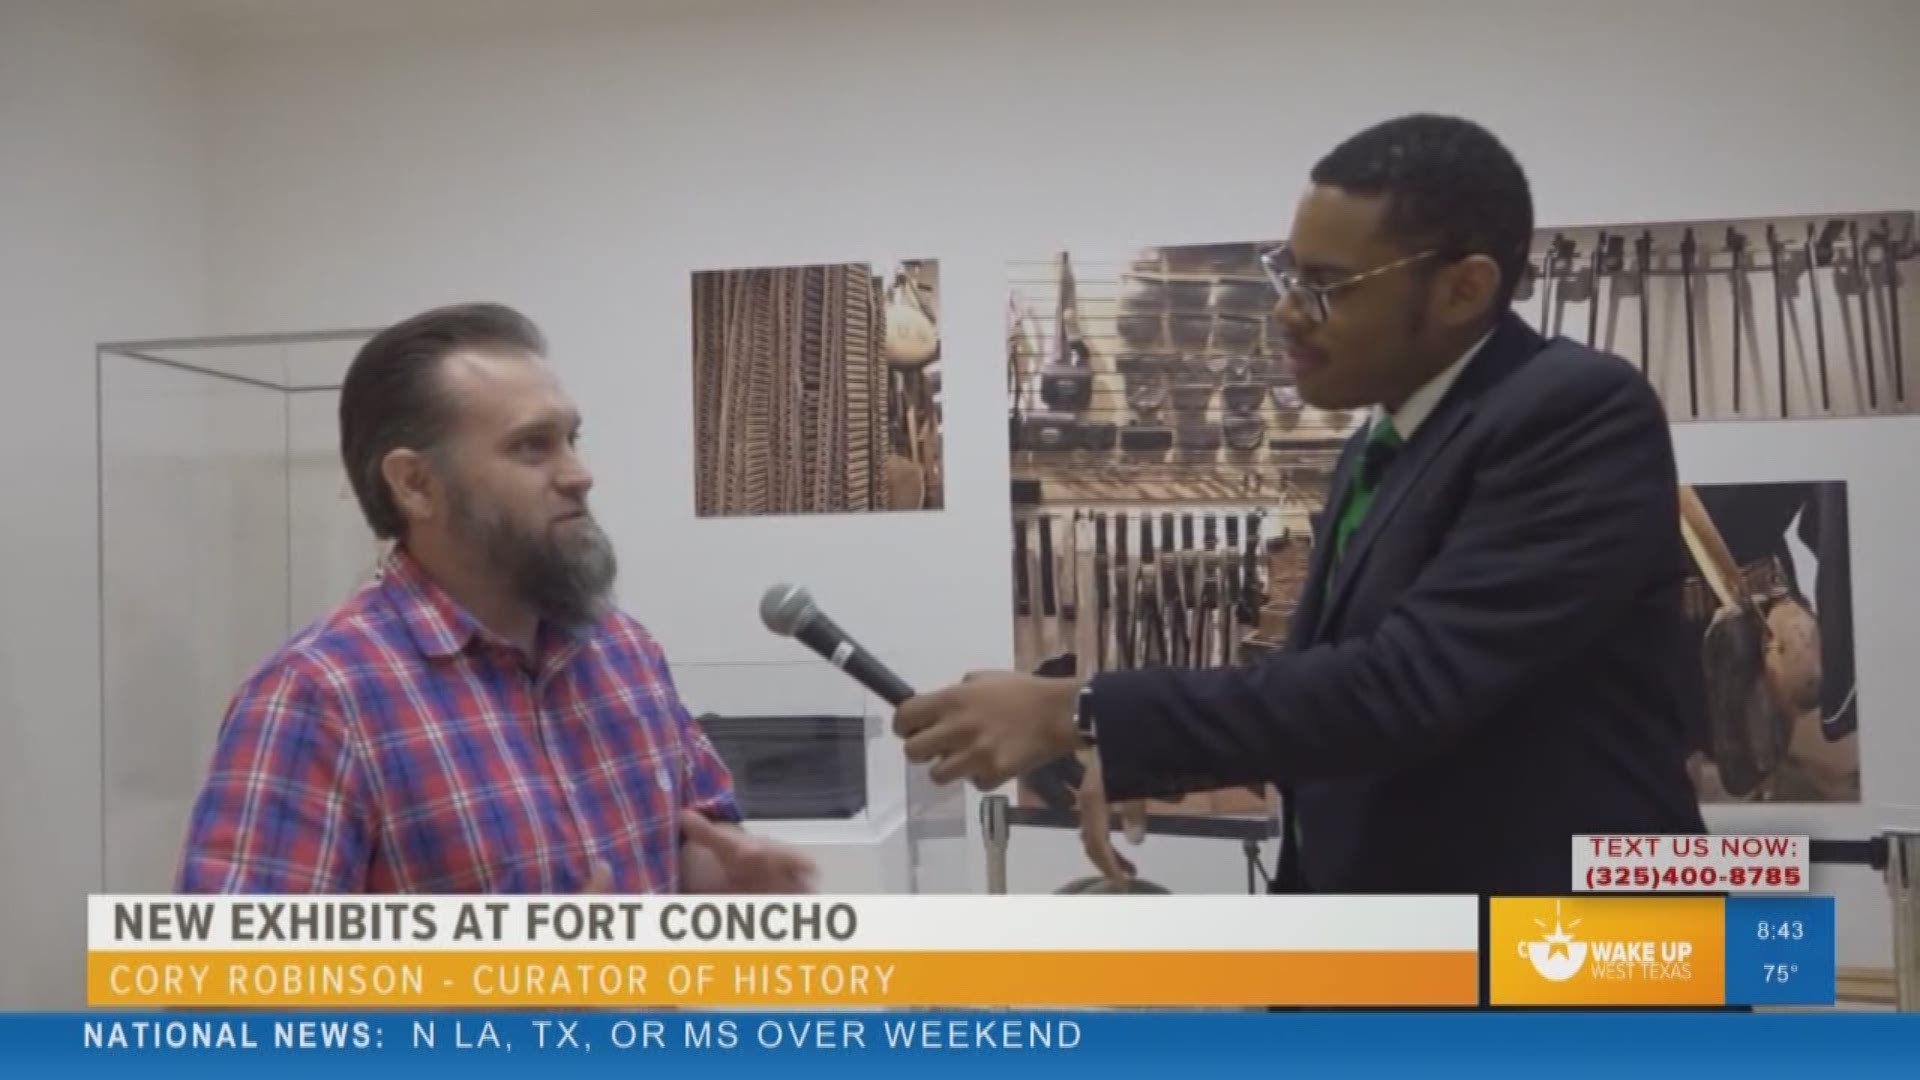 Our Malik Mingo spoke with the curator of history at Fort Concho about a new exhibit featuring summer wear from soldiers.